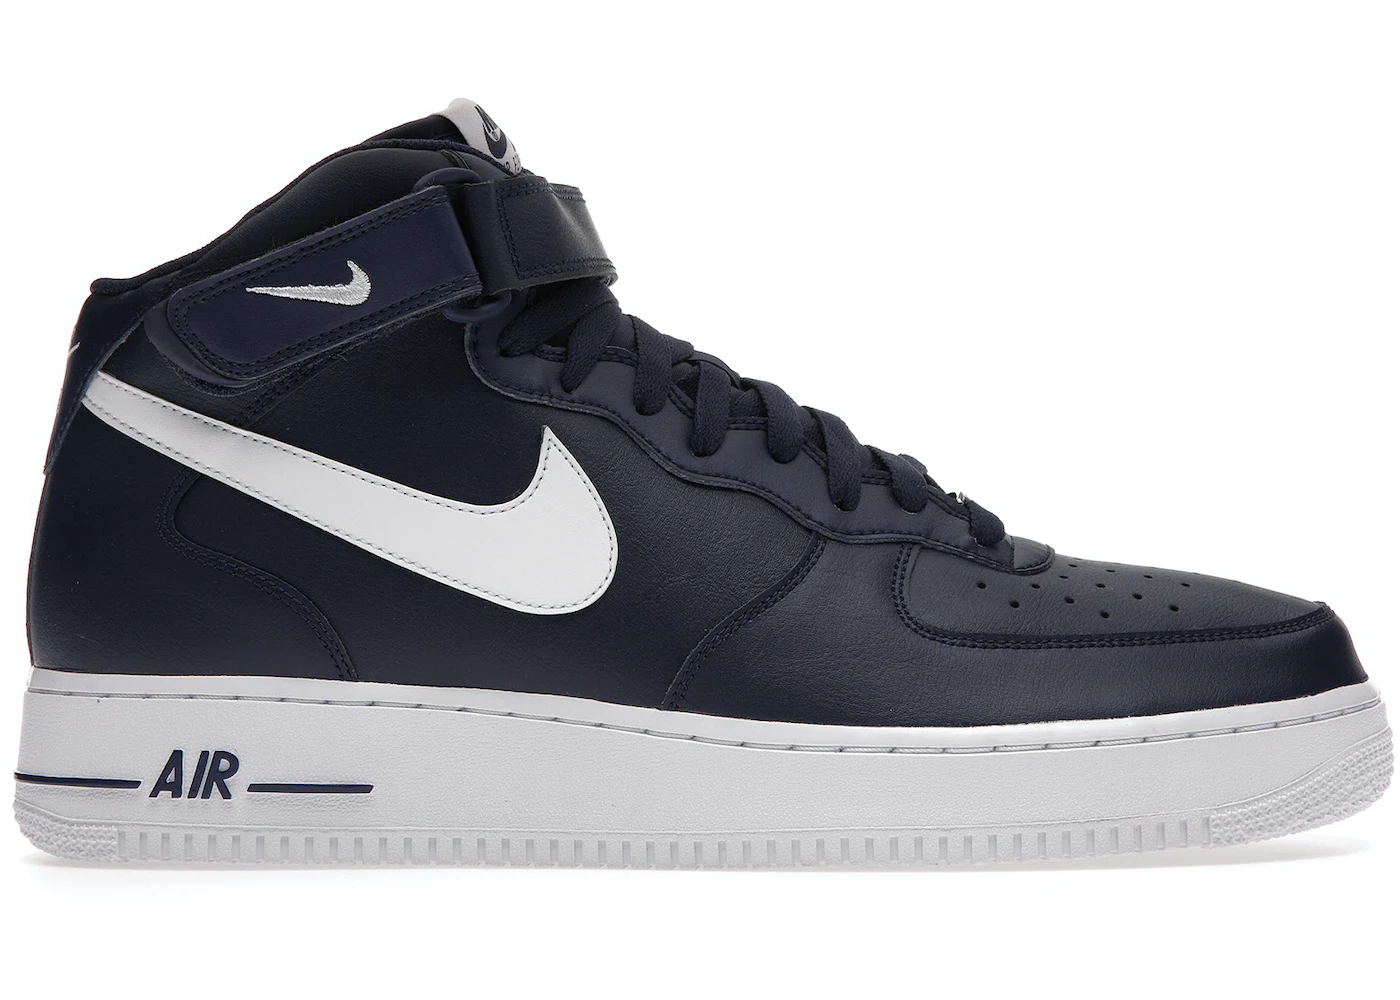 Nike Air Force 1 Mid '07 Midnight Navy - CK4370-400